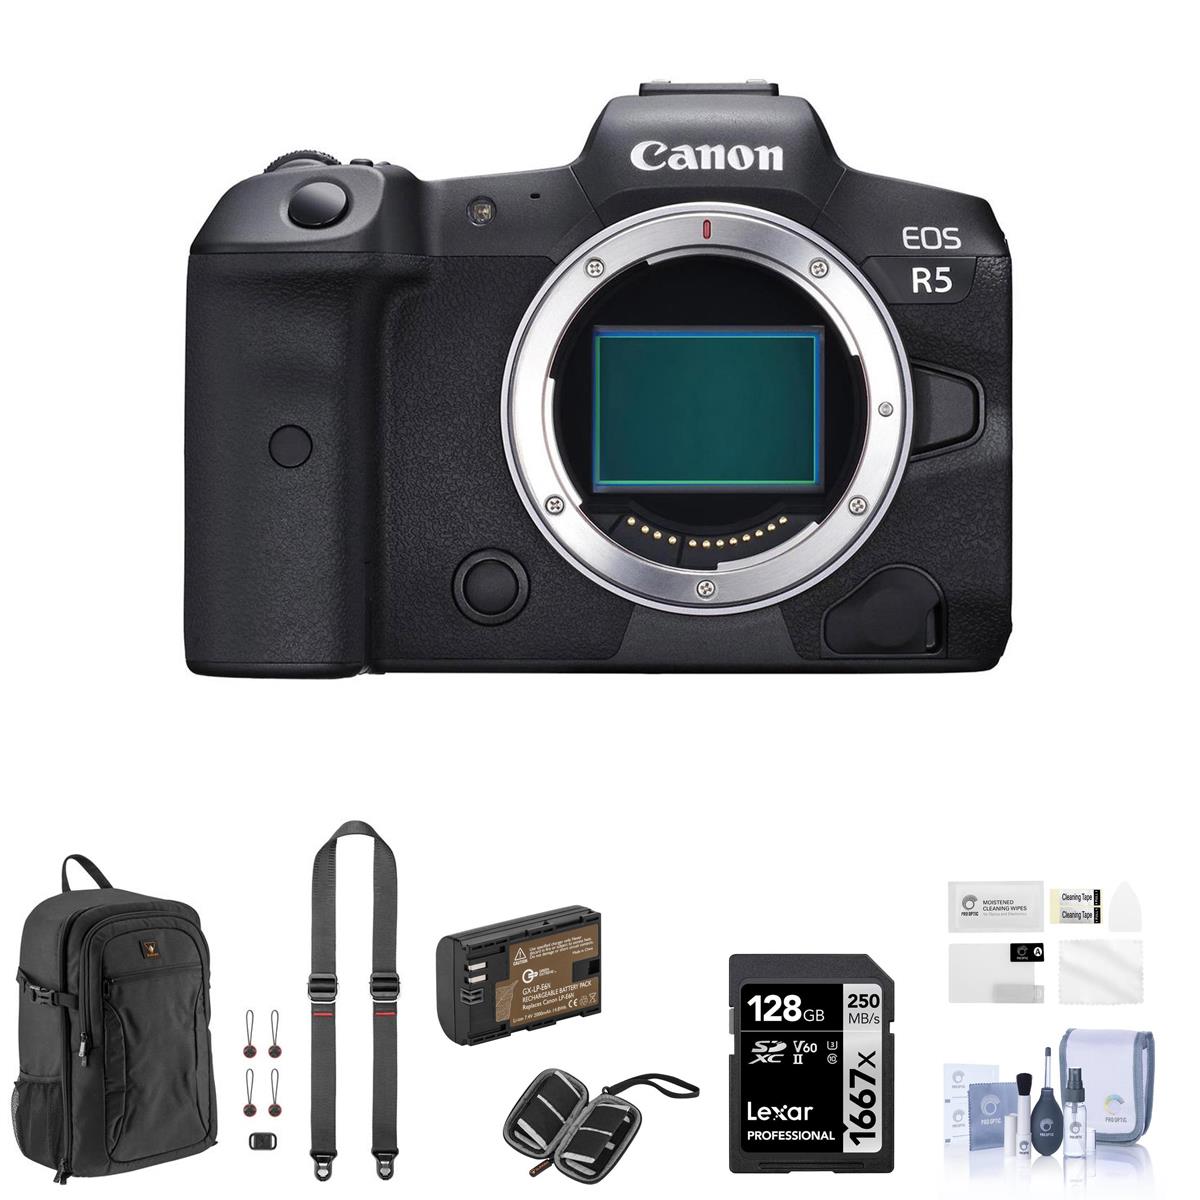 Image of Canon EOS R5 Mirrorless Digital Camera Body with Accessories Kit